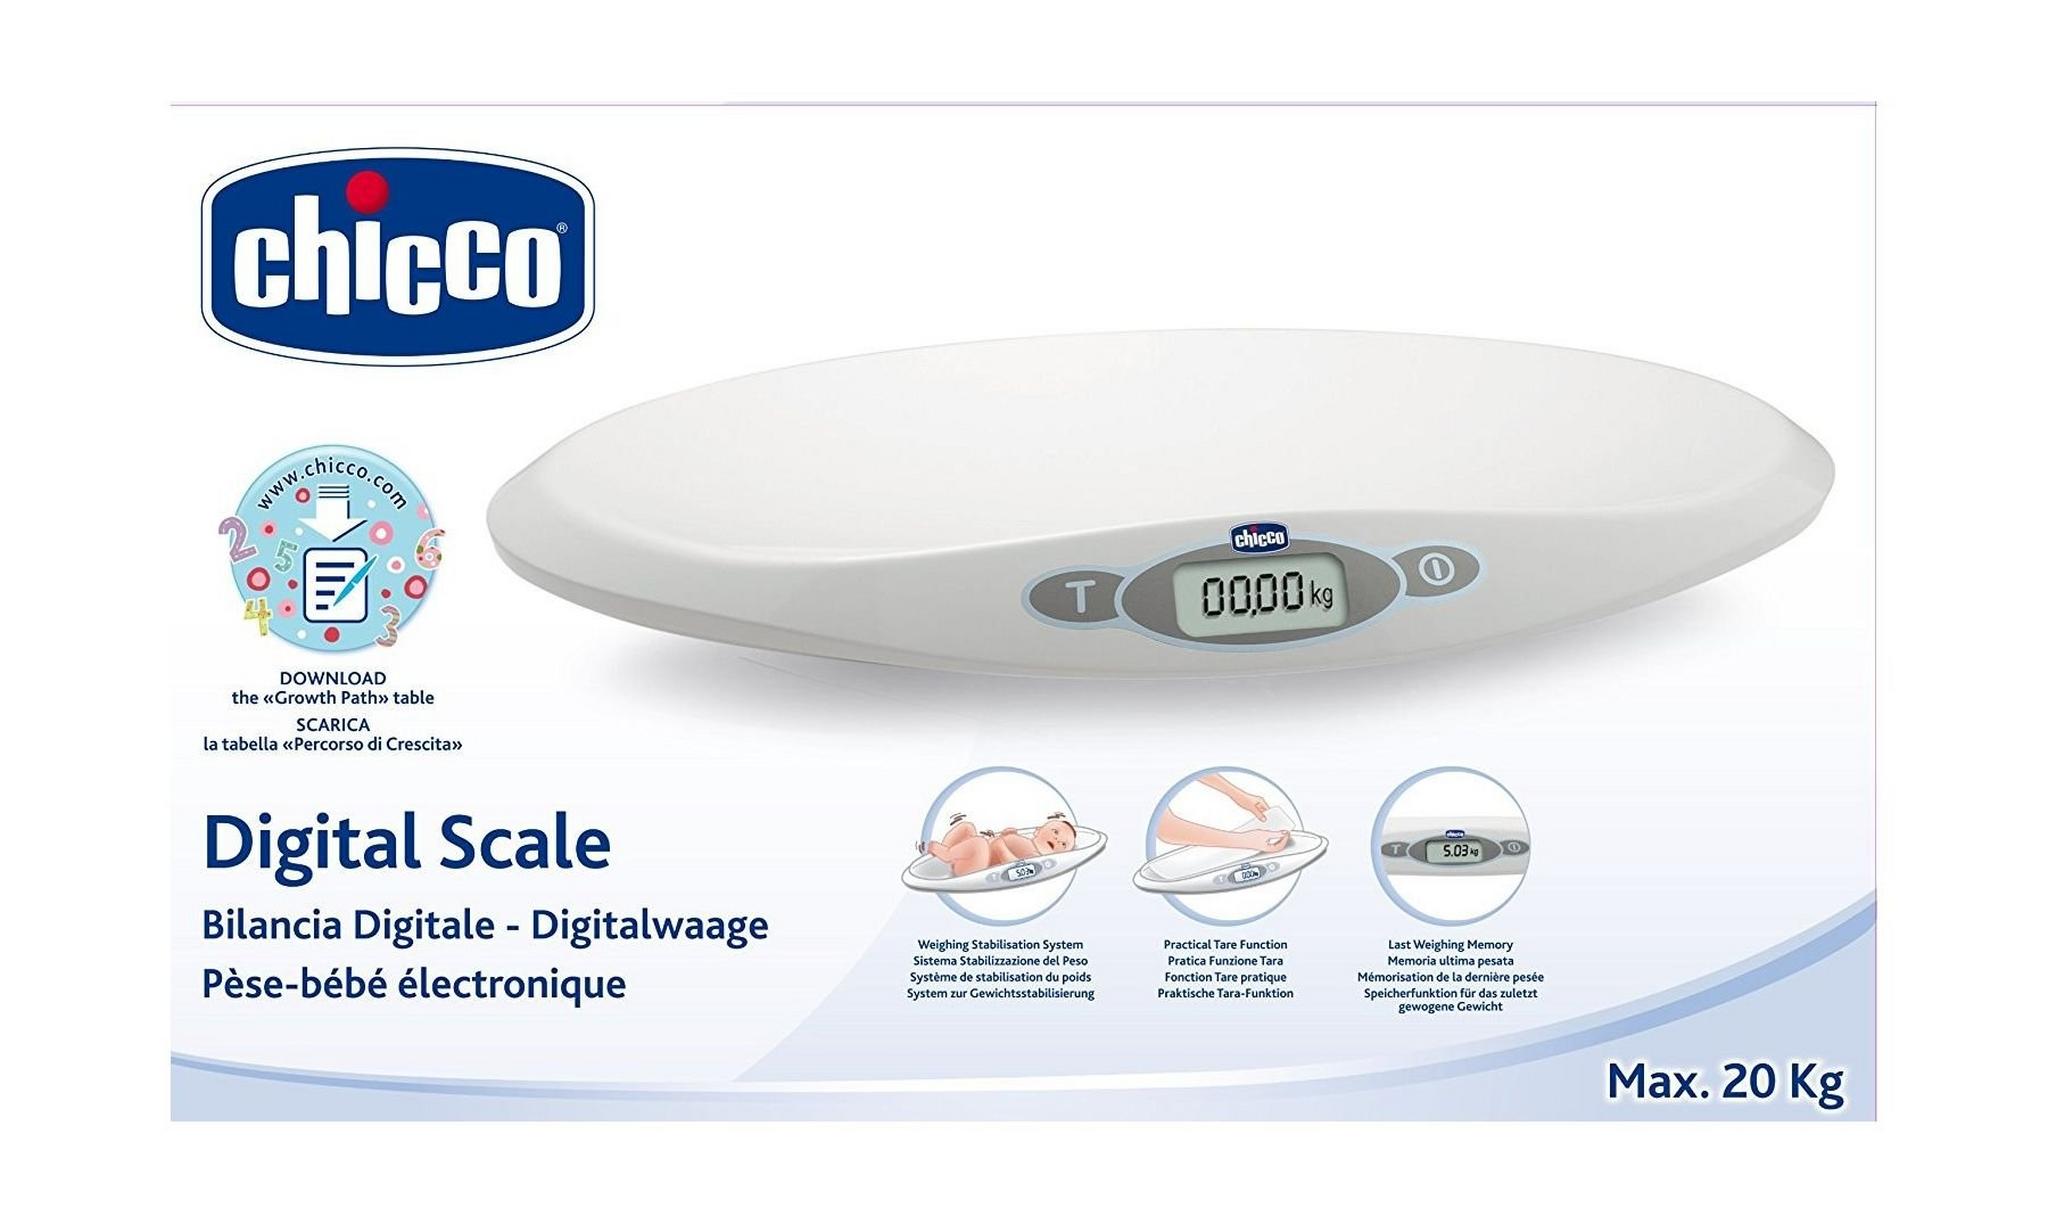 Chicco Digital Electronic Baby Scale (CHCN-000049)